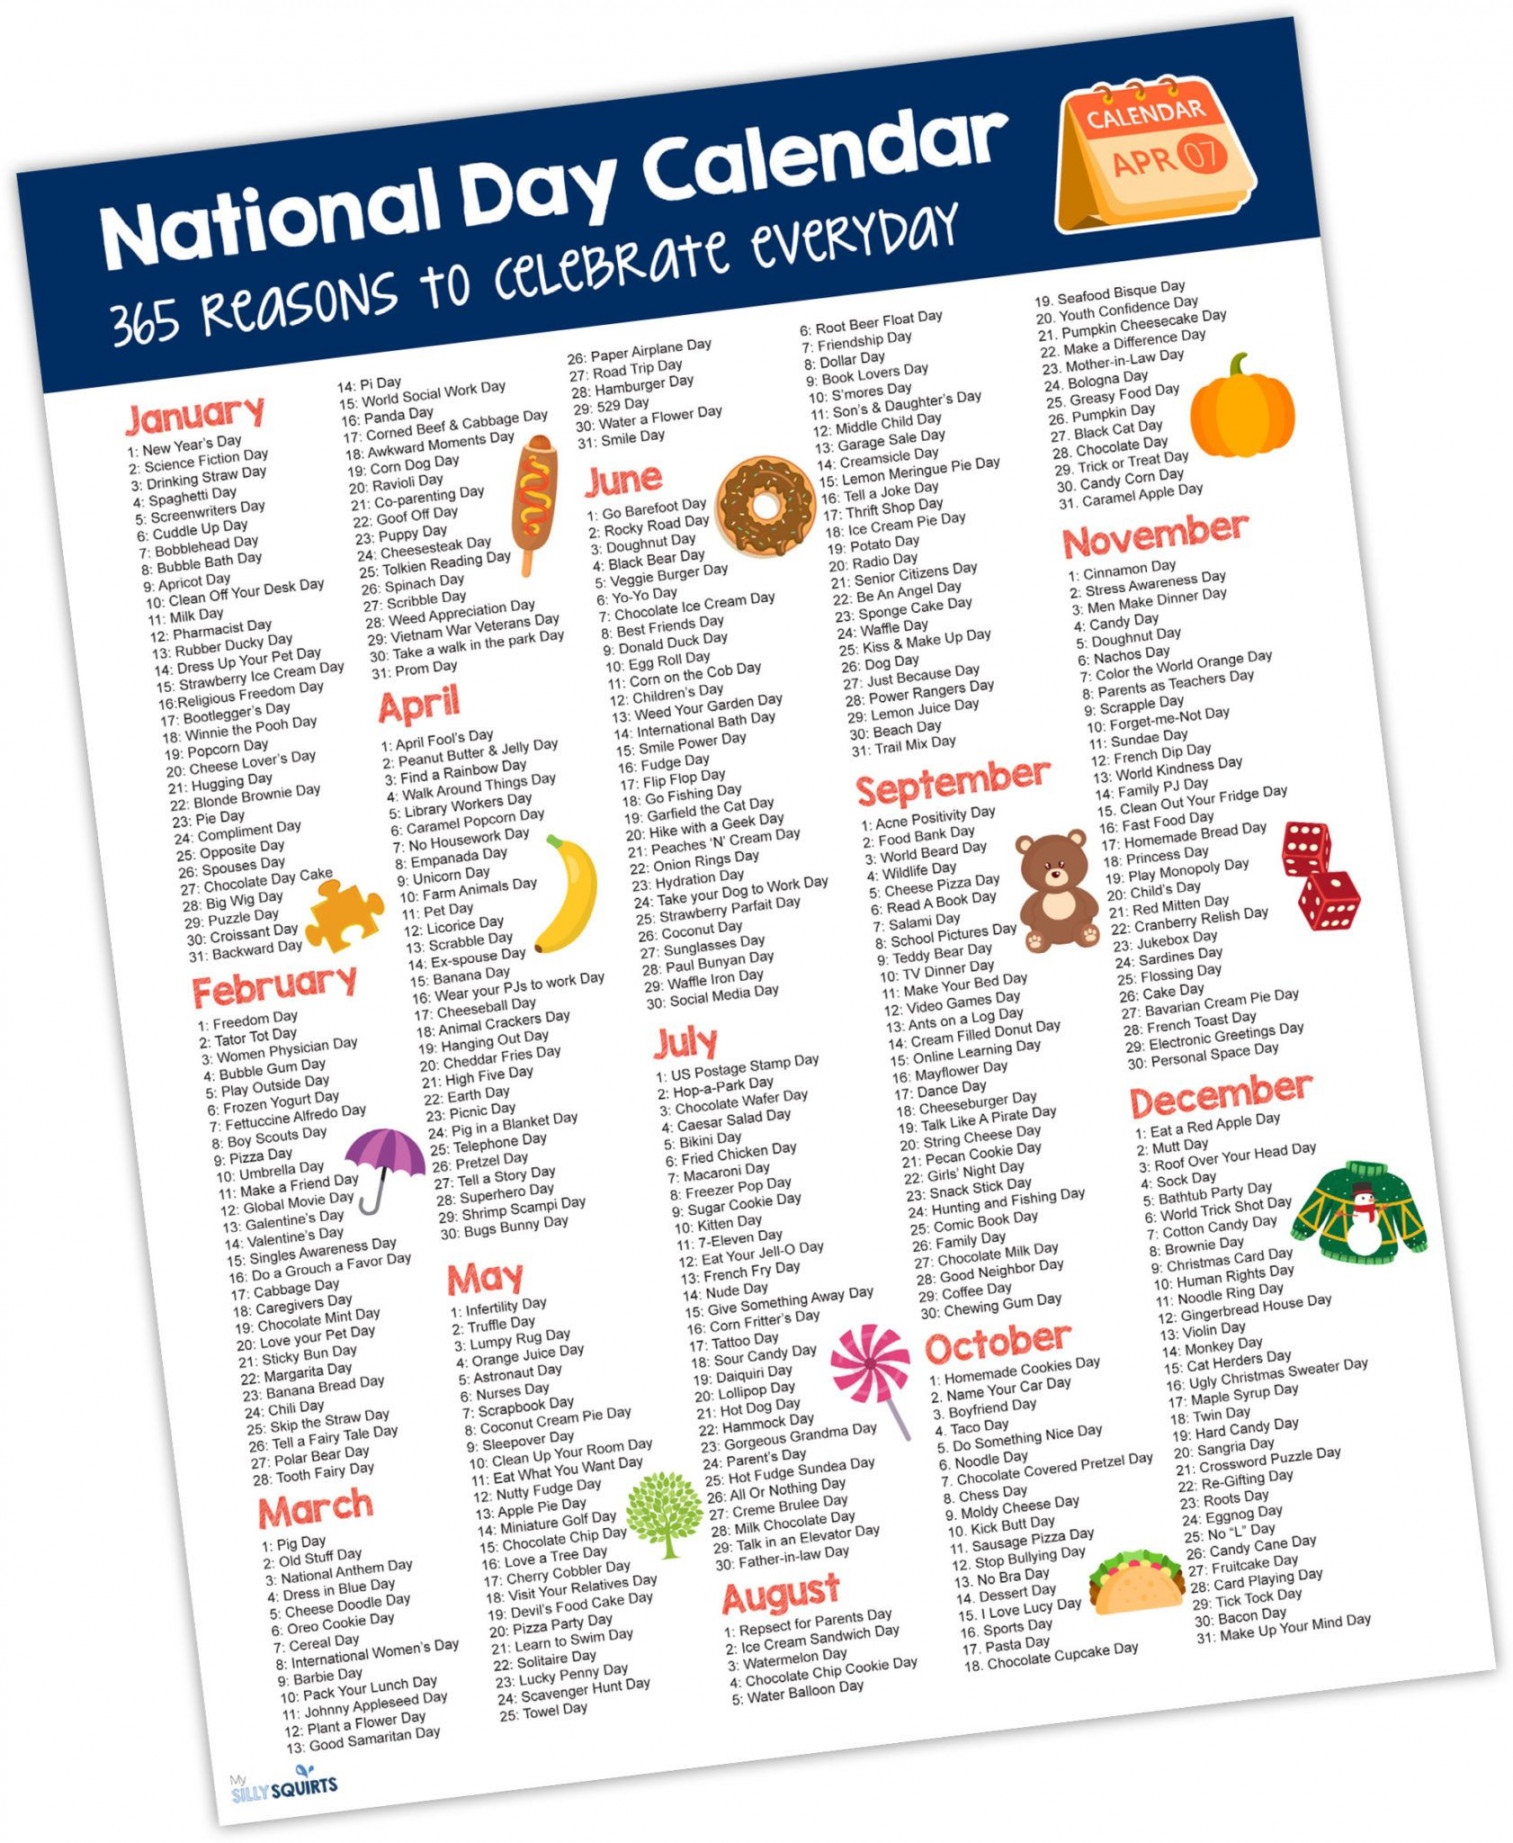 National Day Calendar: reasons to celebrate everyday